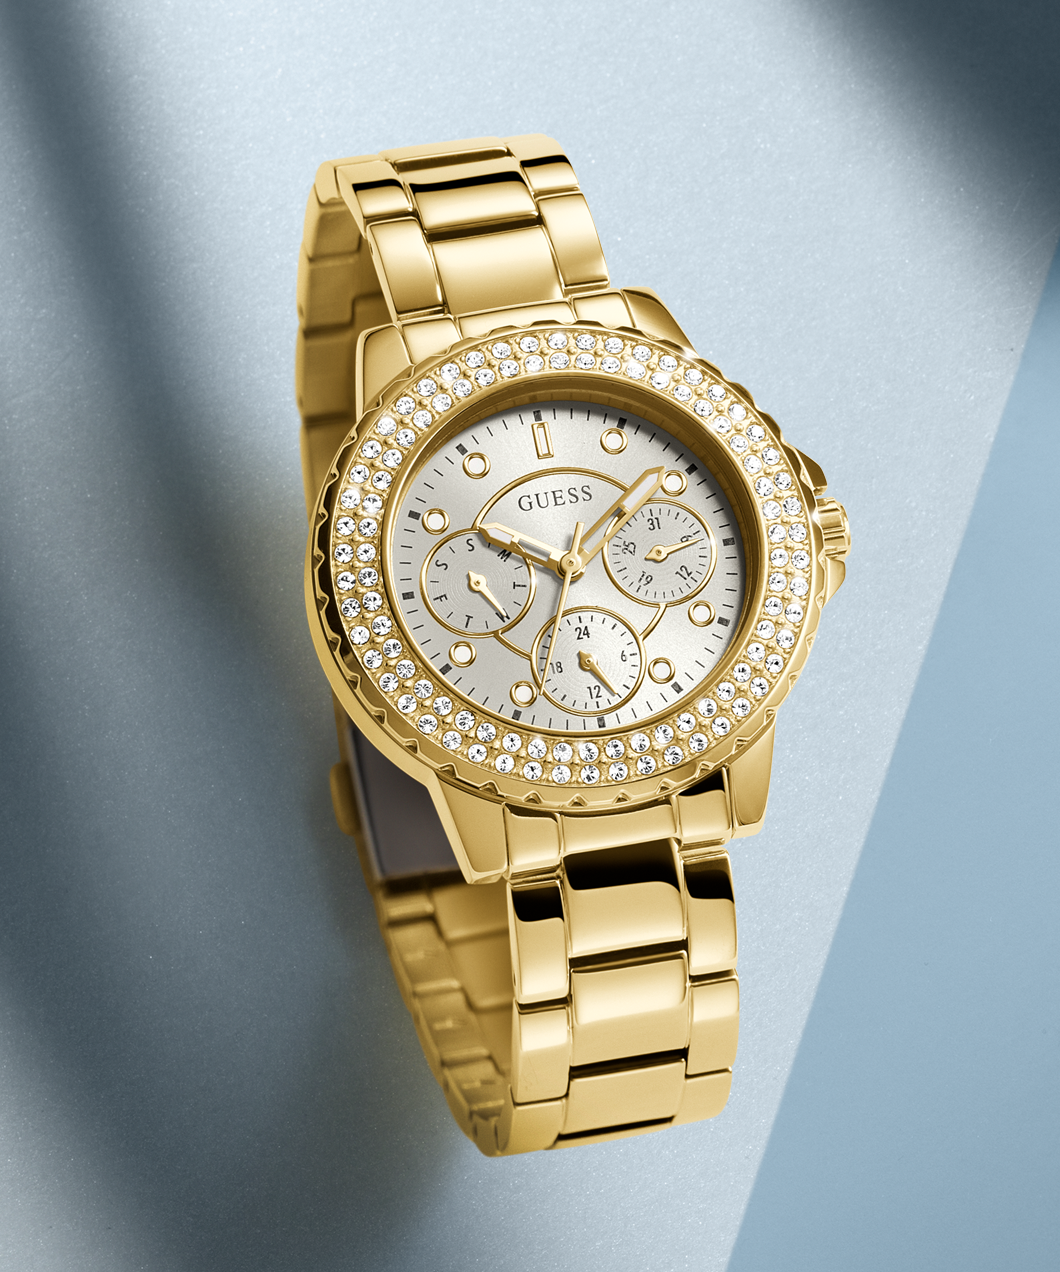 Women's Watches On Sale | GUESS Watches